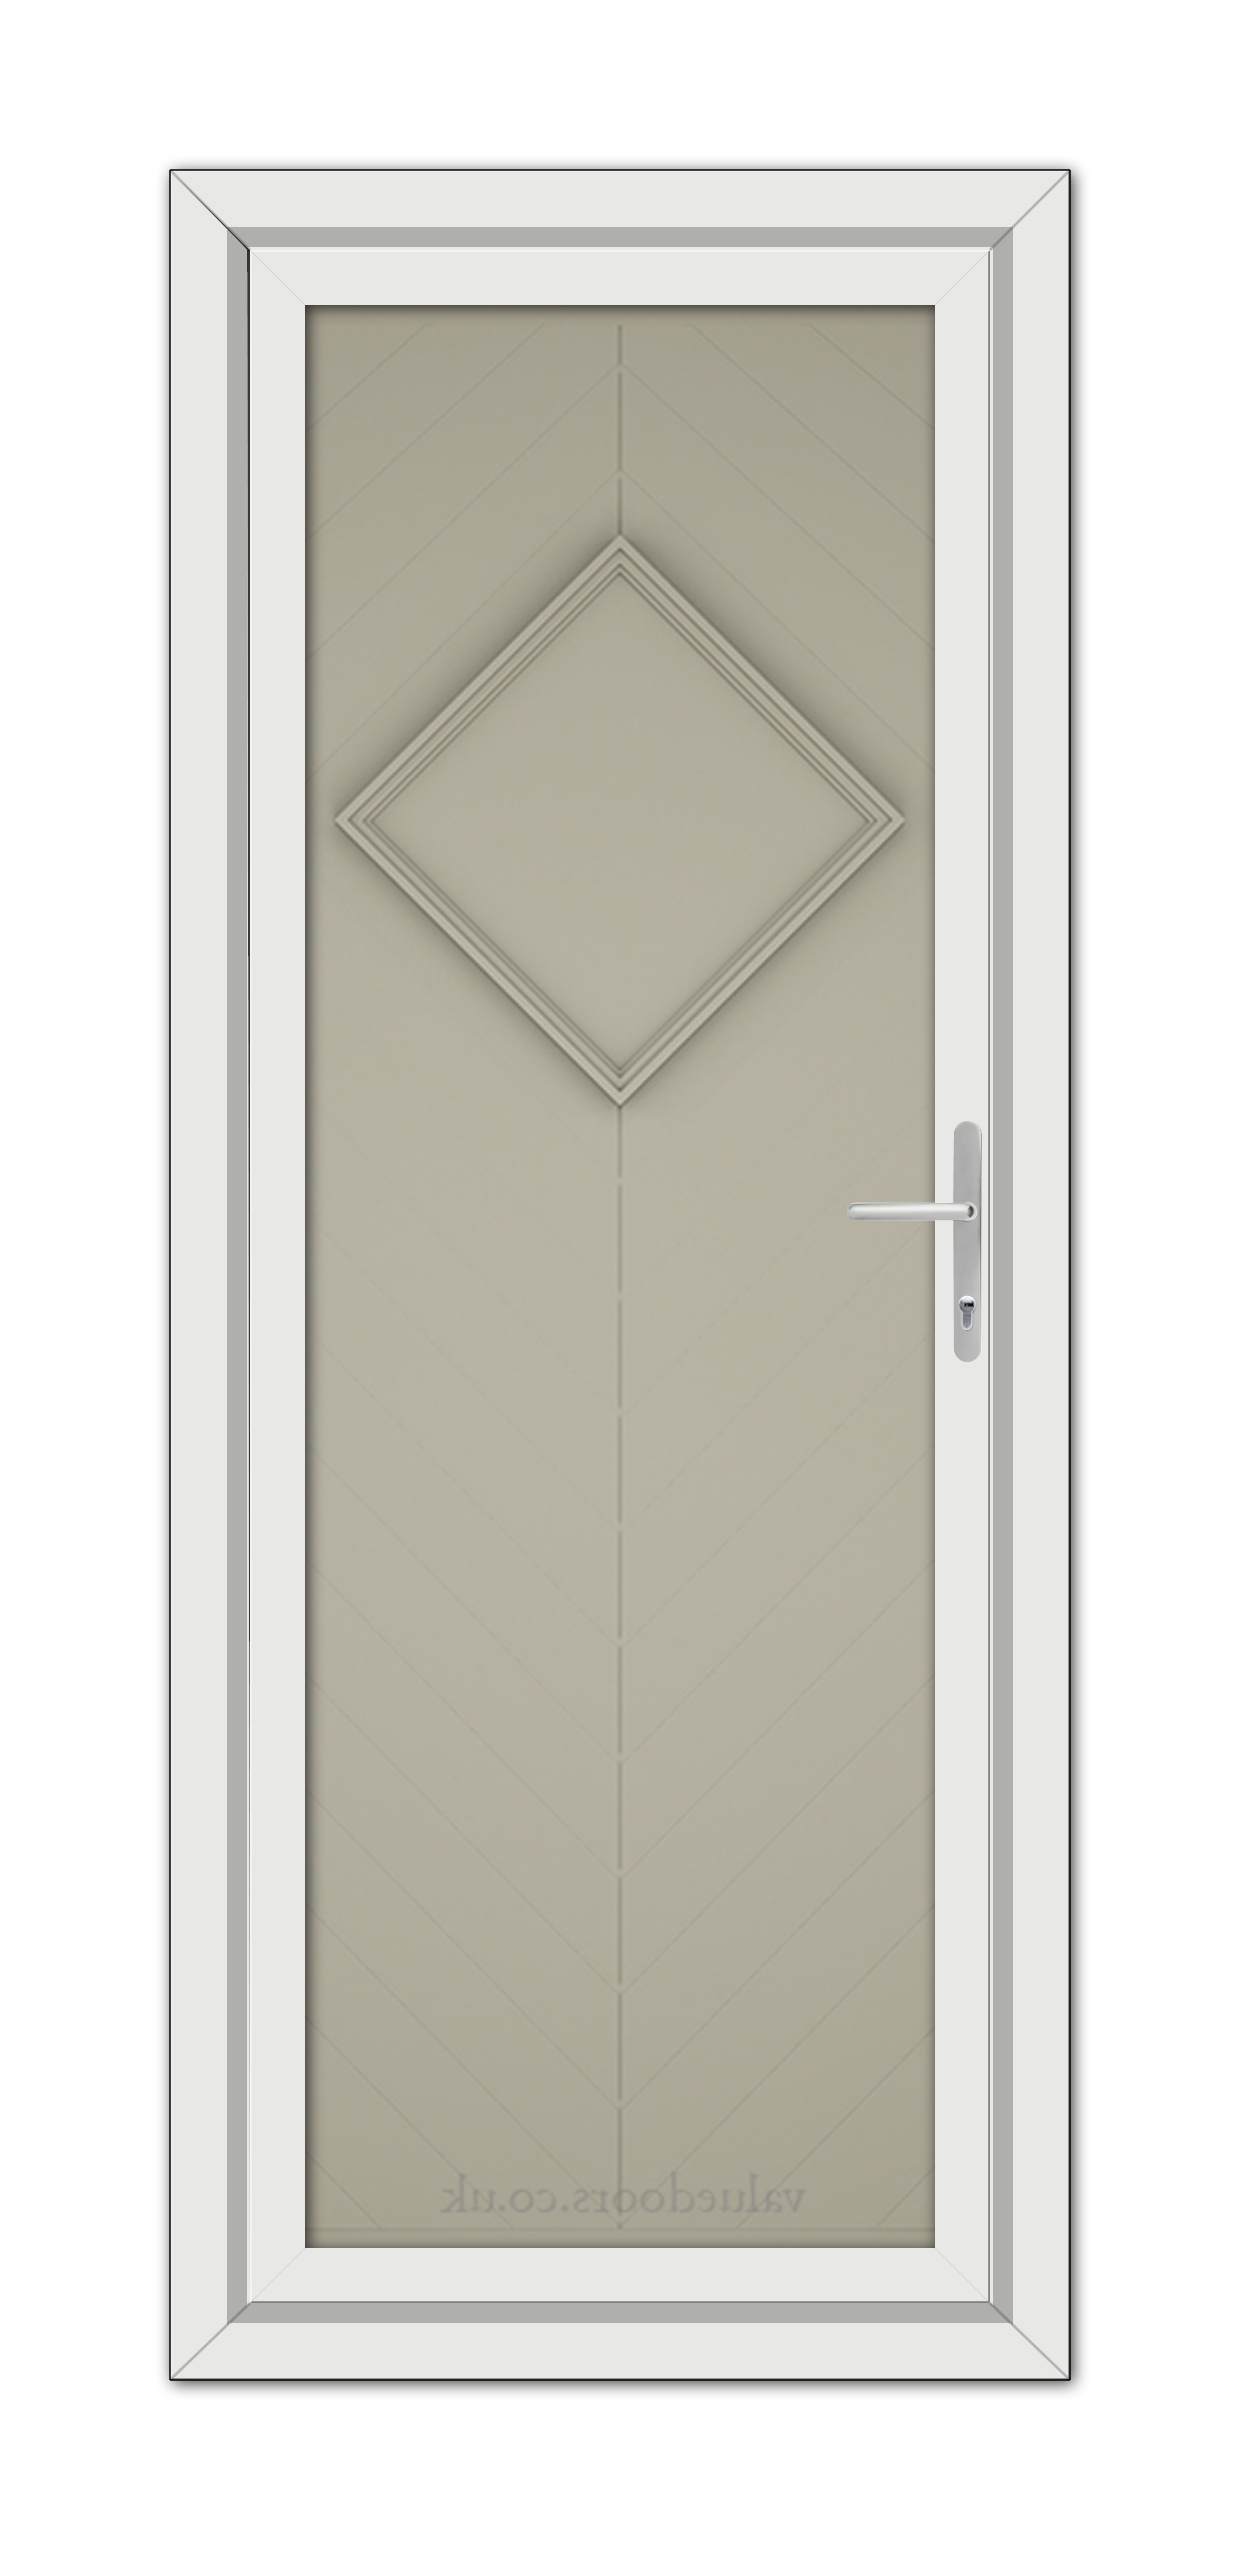 A modern Pebble Grey Hamburg Solid uPVC door with a diamond-shaped window and a silver handle, set within a white frame.